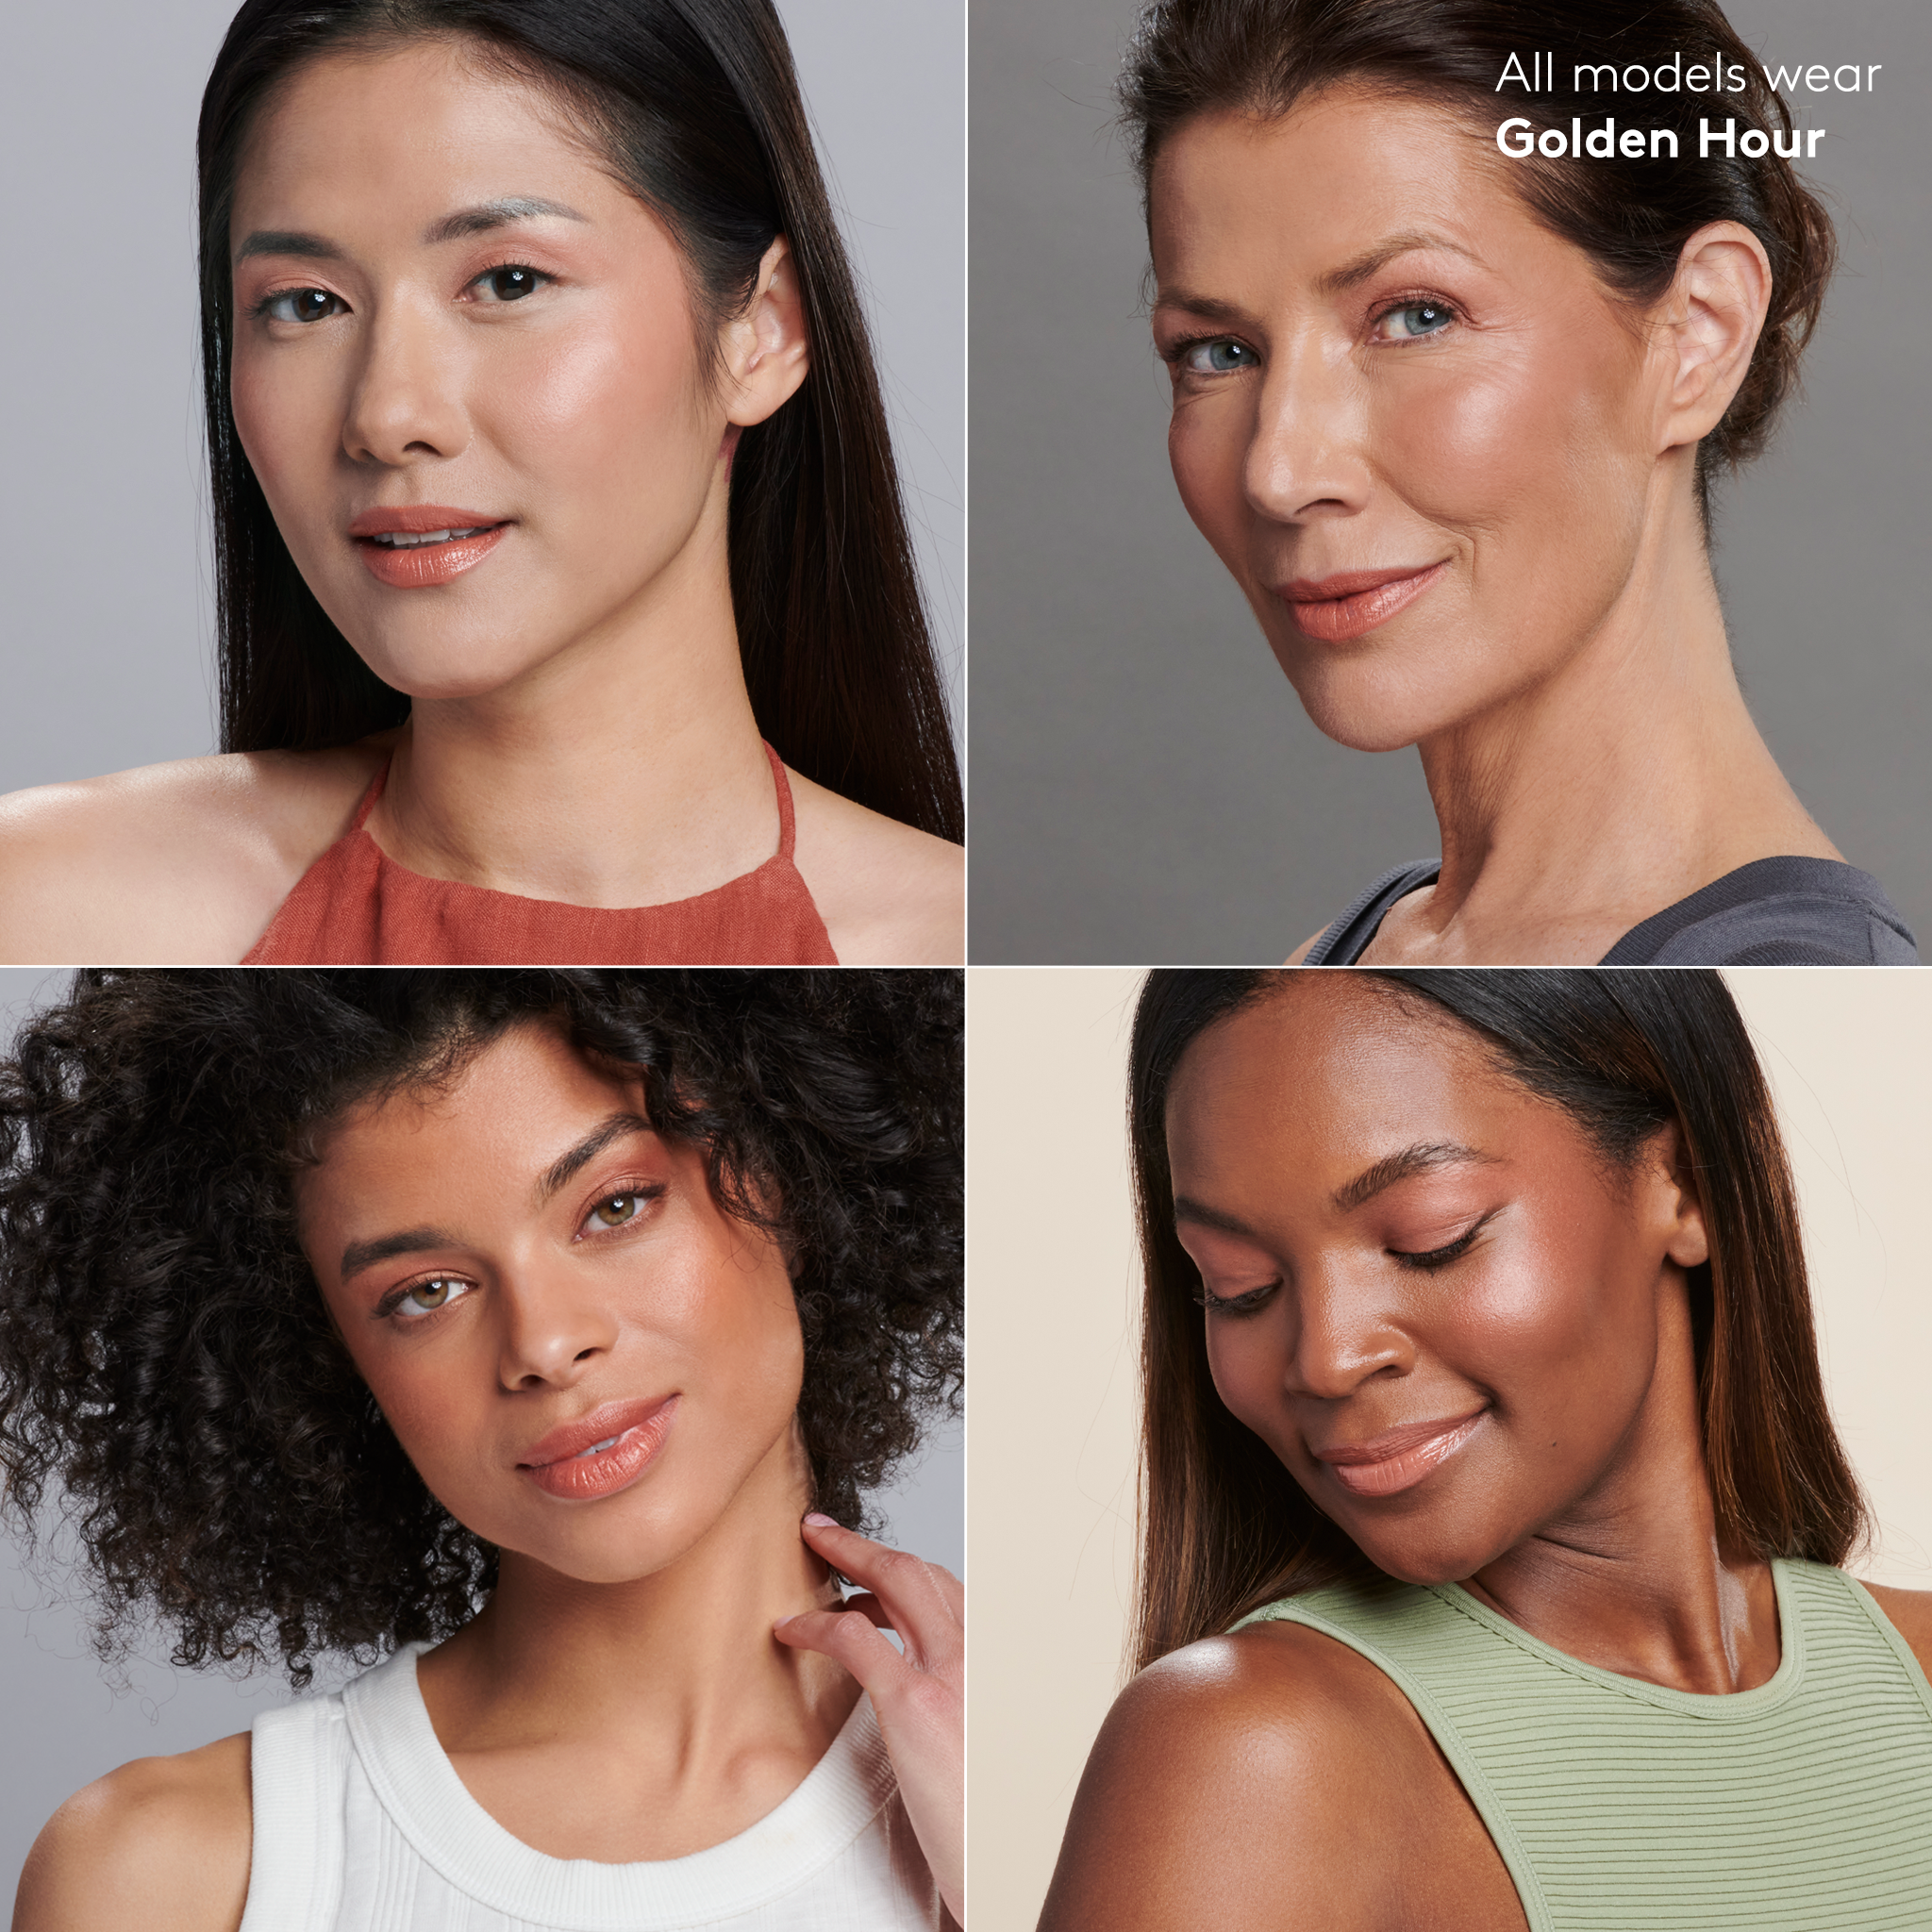 4 models of fair, medium, tan and deep skin tone wearing Golden Hour shade of the Sunforgettable® Total Protection™ Color Balm SPF 50 Endless Sunset Collection || Golden Hour